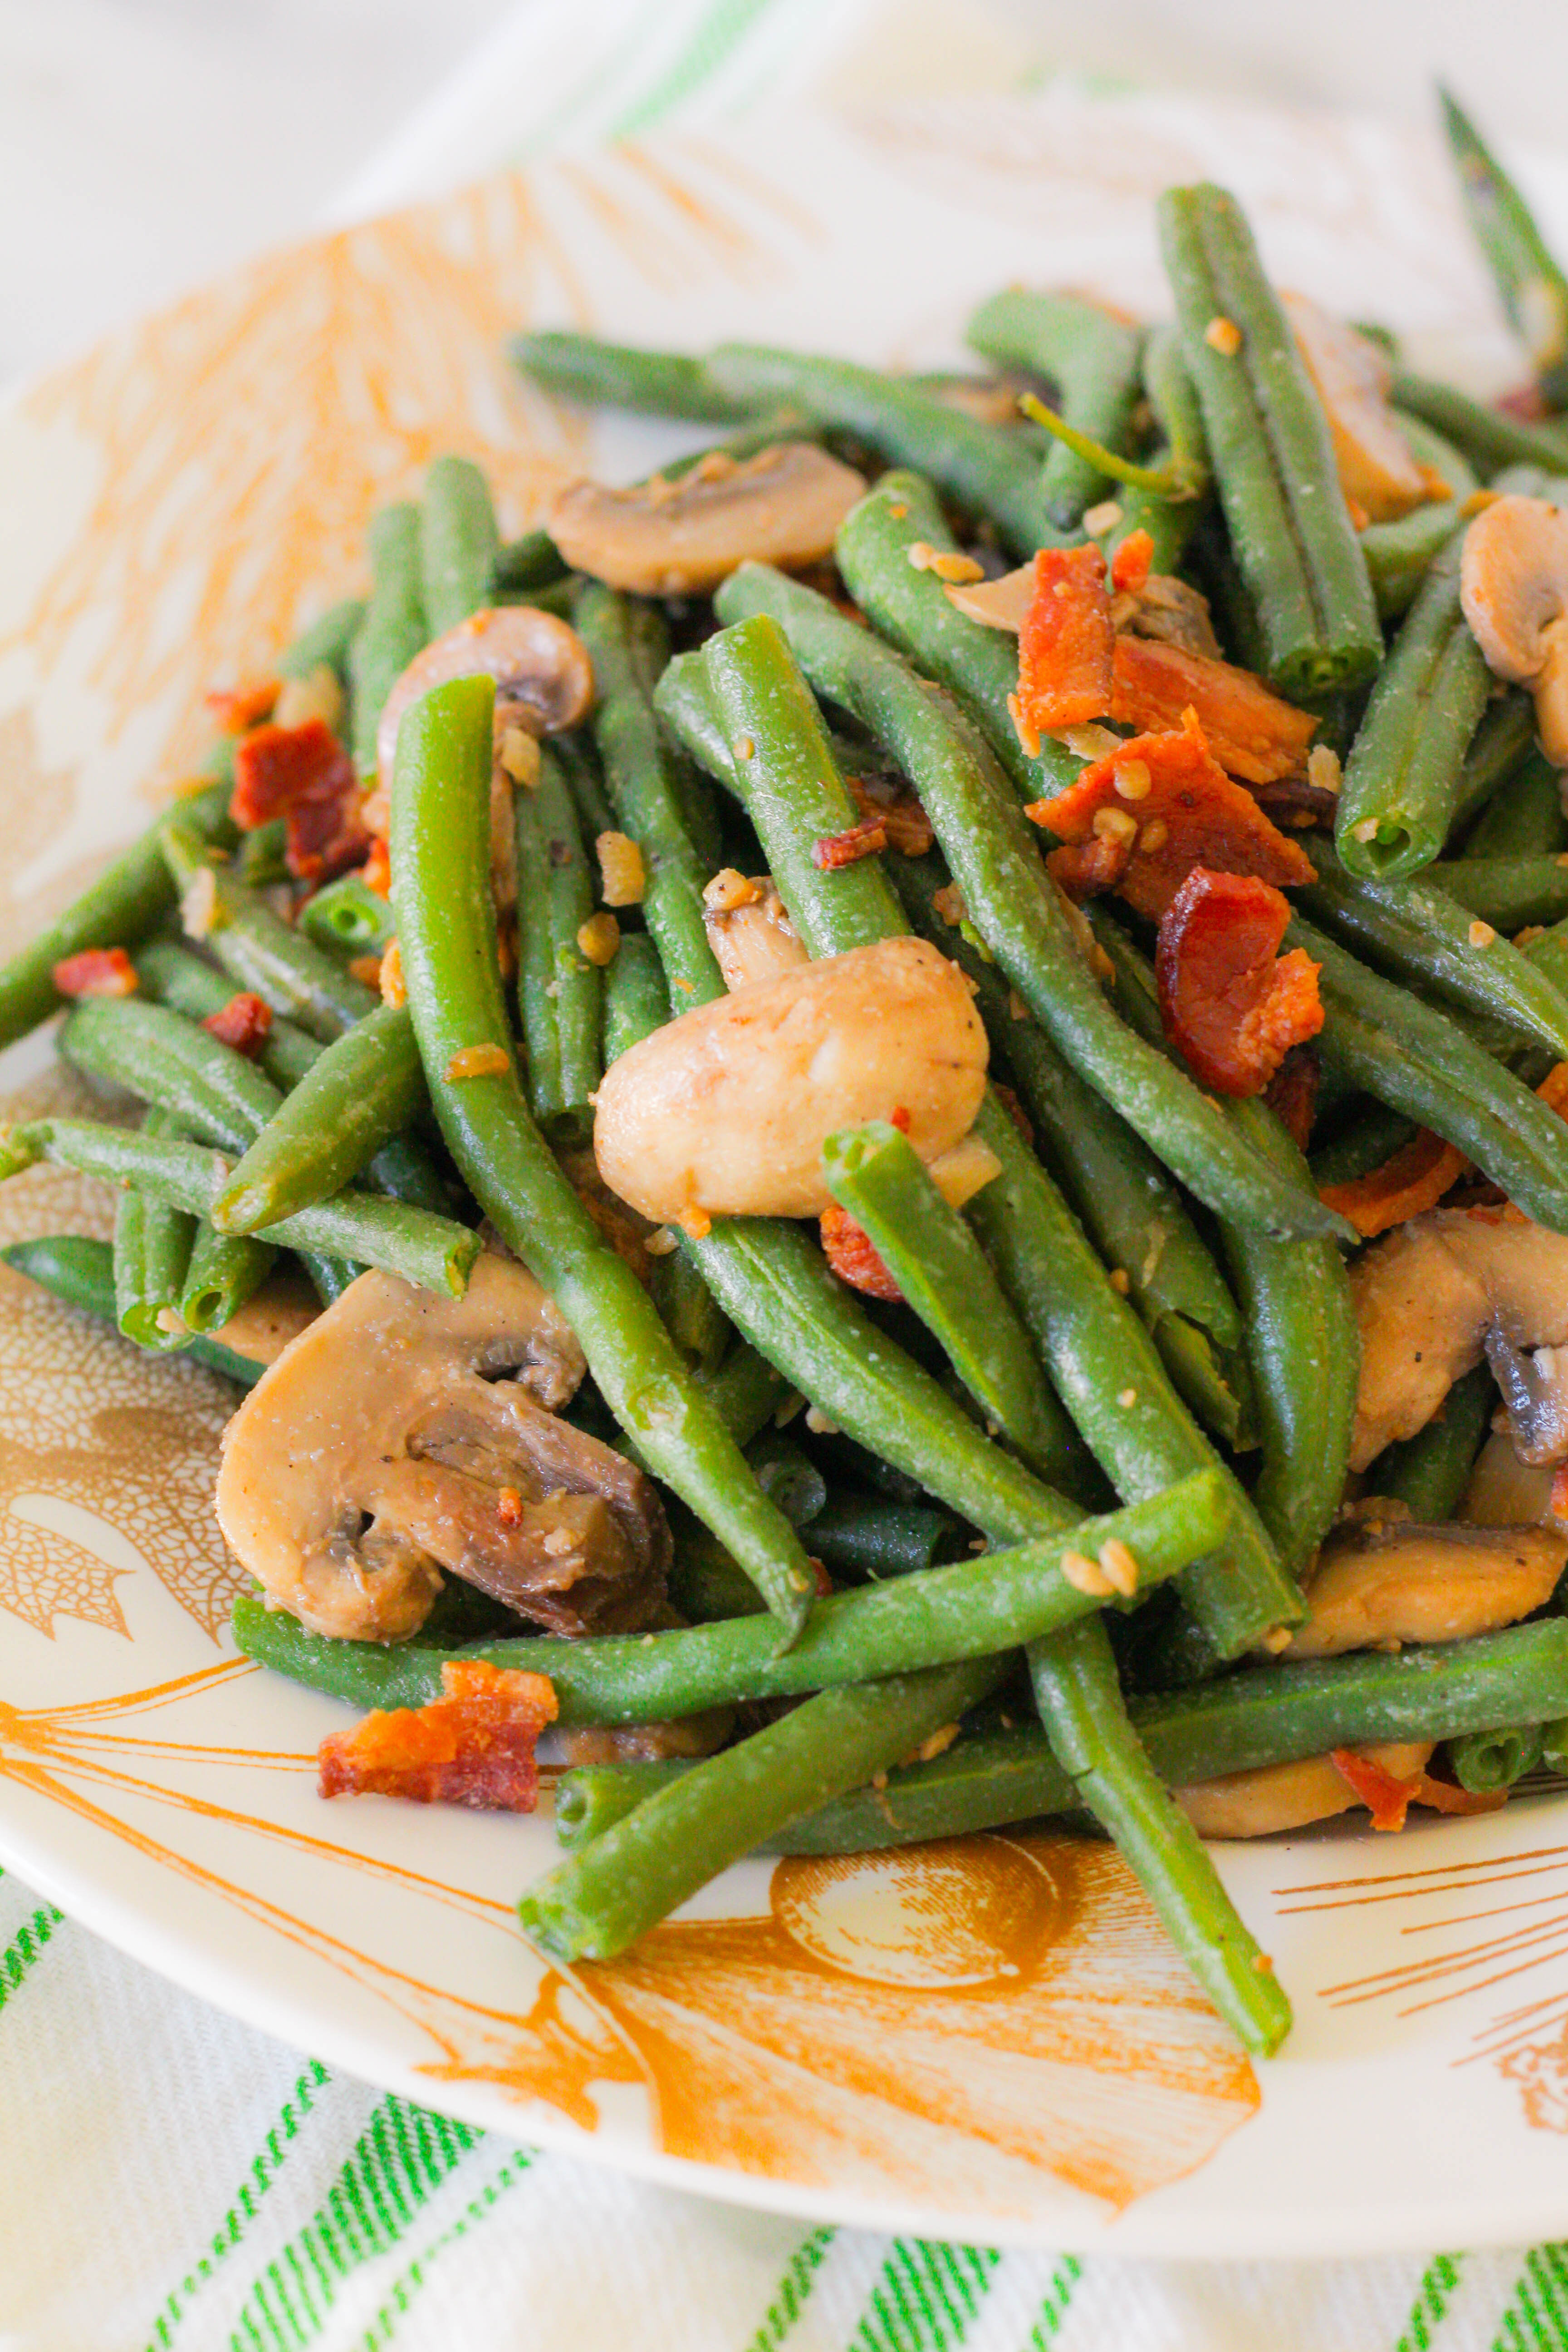 Instant Pot Green Beans with Mushrooms & Bacon | Green beans | Instant pot recipes | Thanksgiving | Holiday recipes | Vegetable side dish